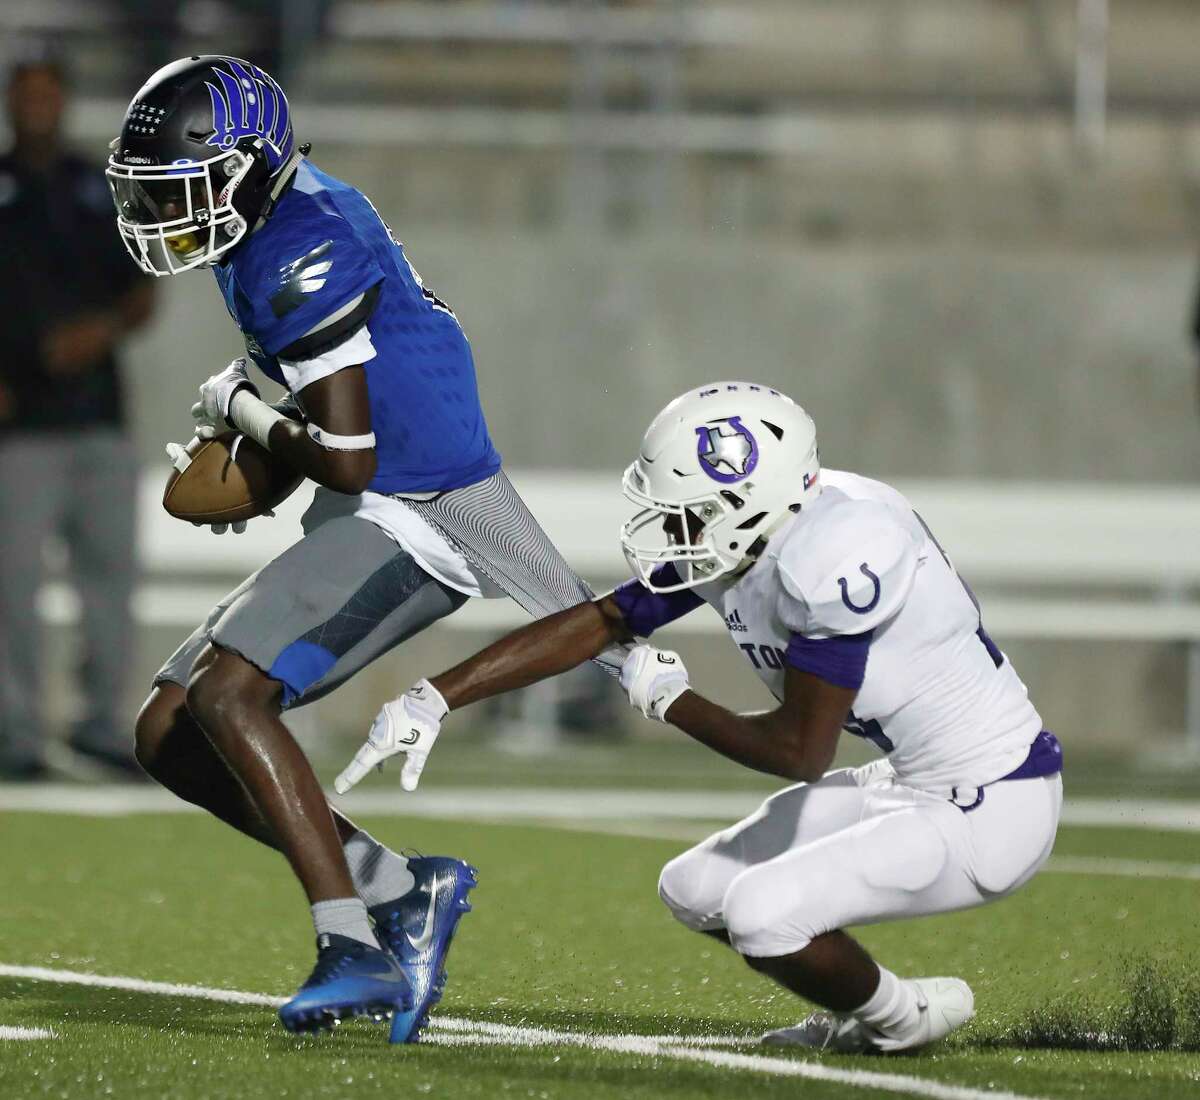 New Caney's Dwight McGlothern reaches up to catch a pass over Dayton's Treval Keener (20), which he ended up running in for a touchdown during the first half of a high school fiootball game at Texan Drive Stadium, Friday, Sept. 29, 2017, in Porter. ( Karen Warren / Houston Chronicle )